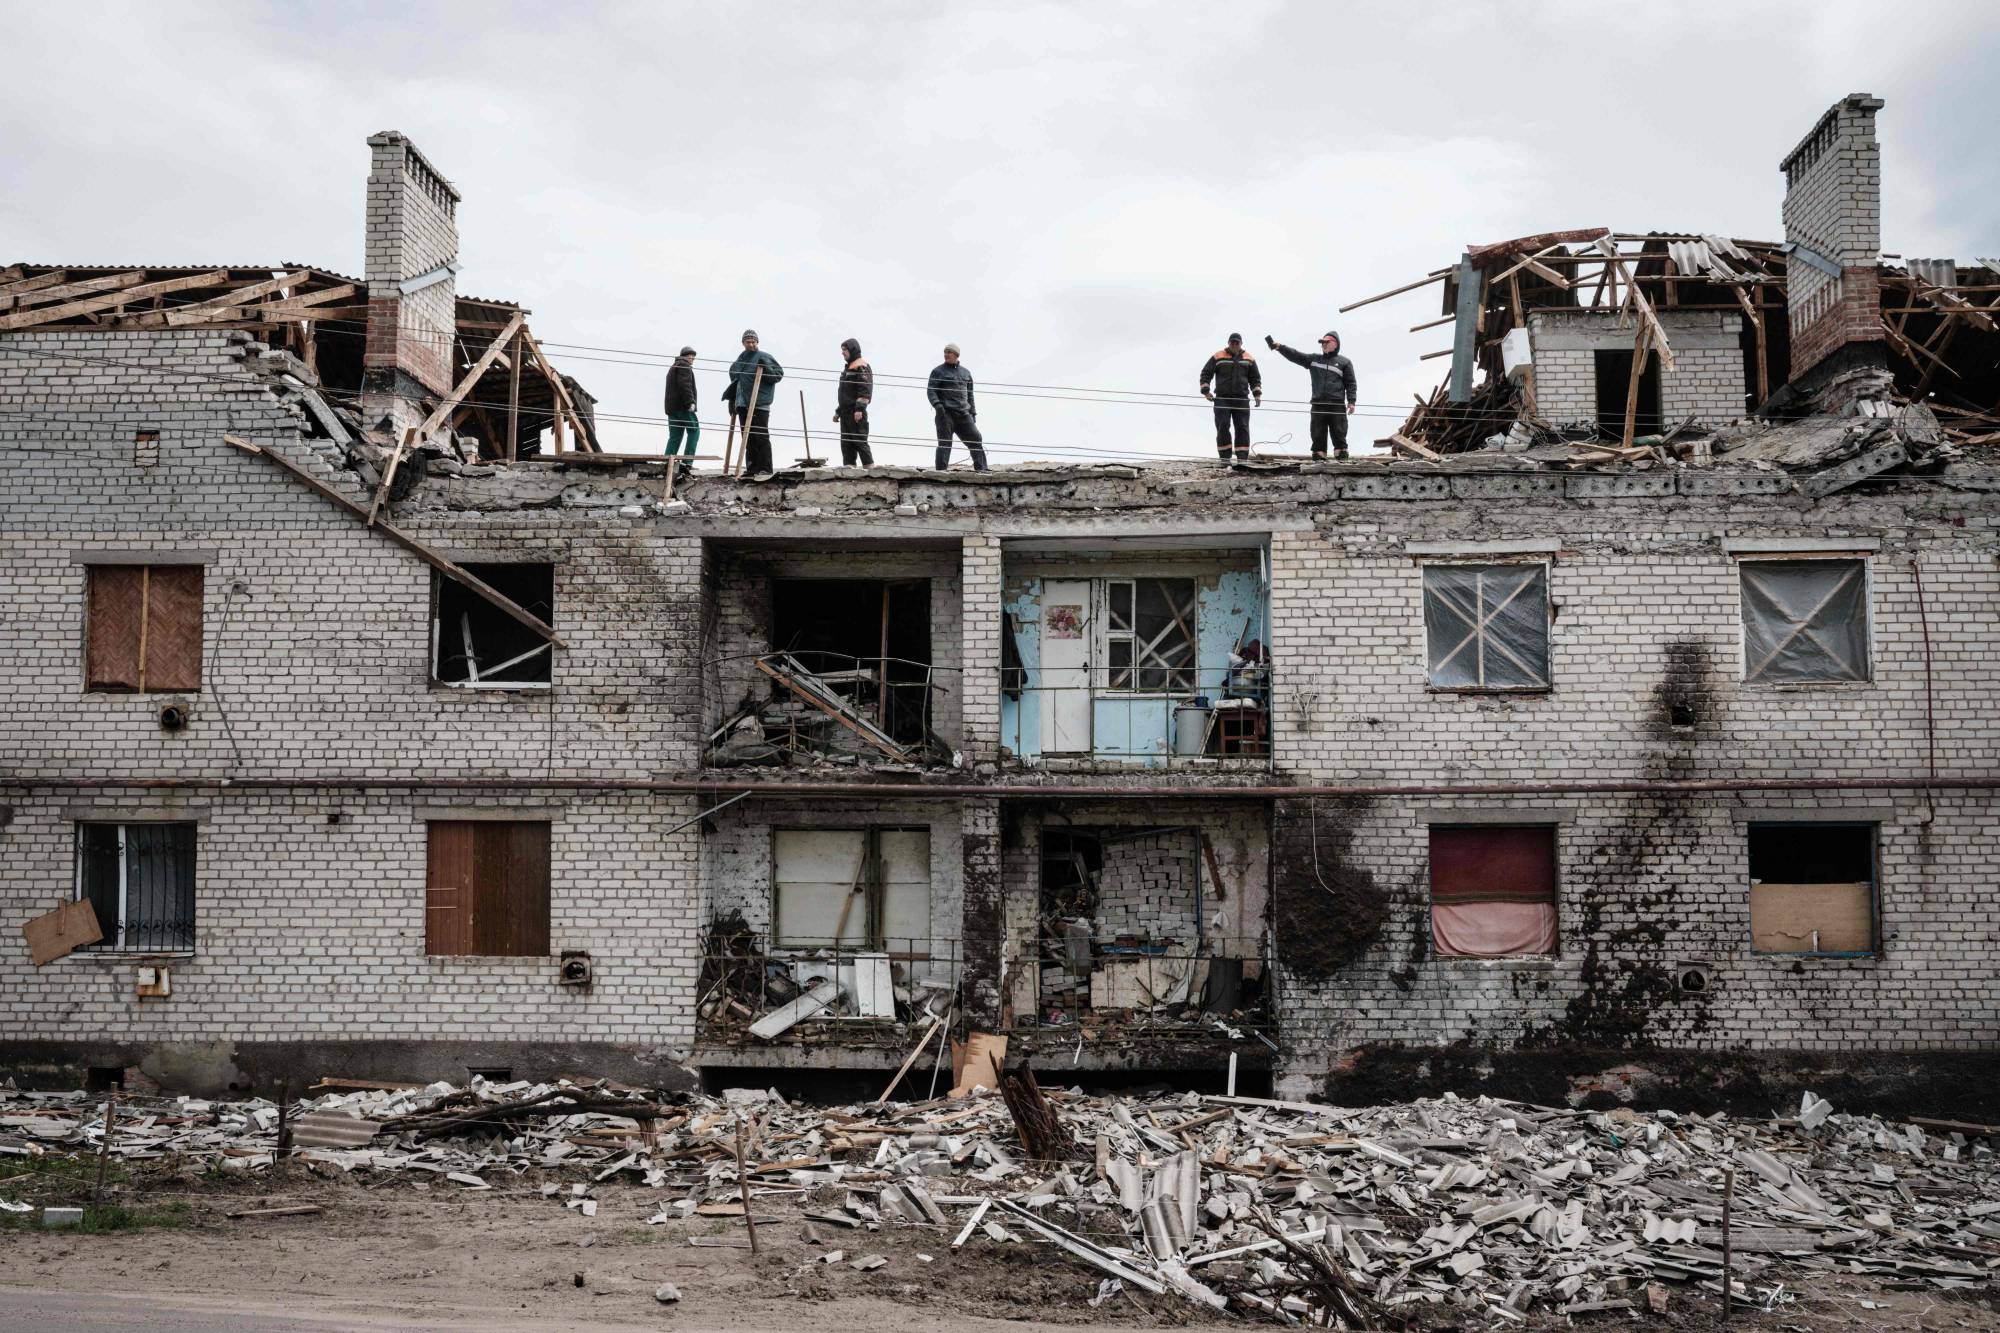 Workers clean rubble atop a building destroyed by shelling a month ago in Cherkaske, eastern Ukraine, on Wednesday | AFP-JIJI